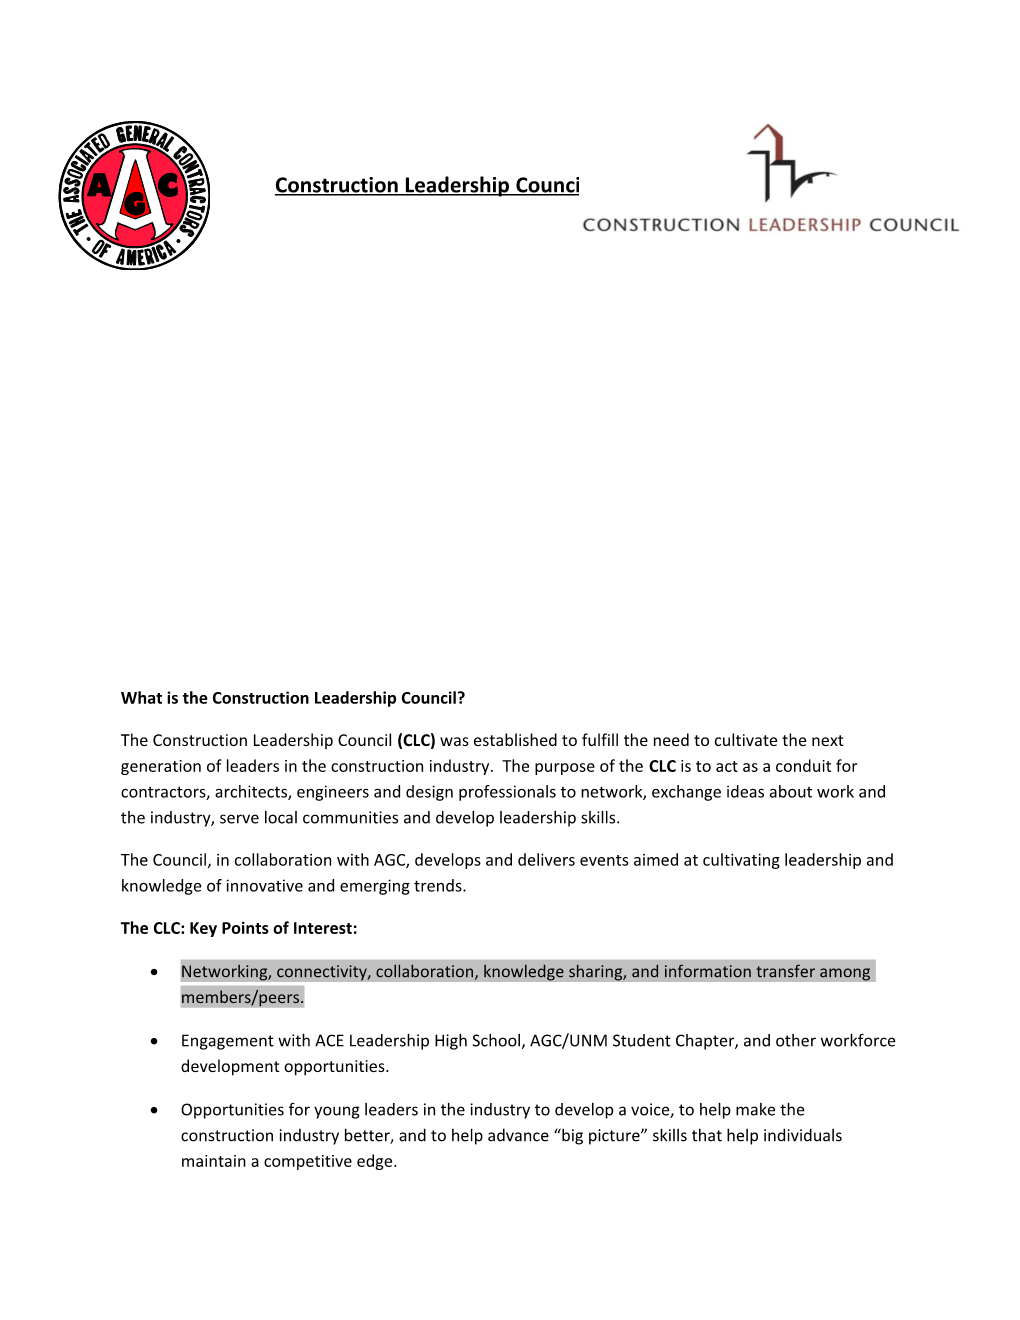 What Is the Construction Leadership Council?